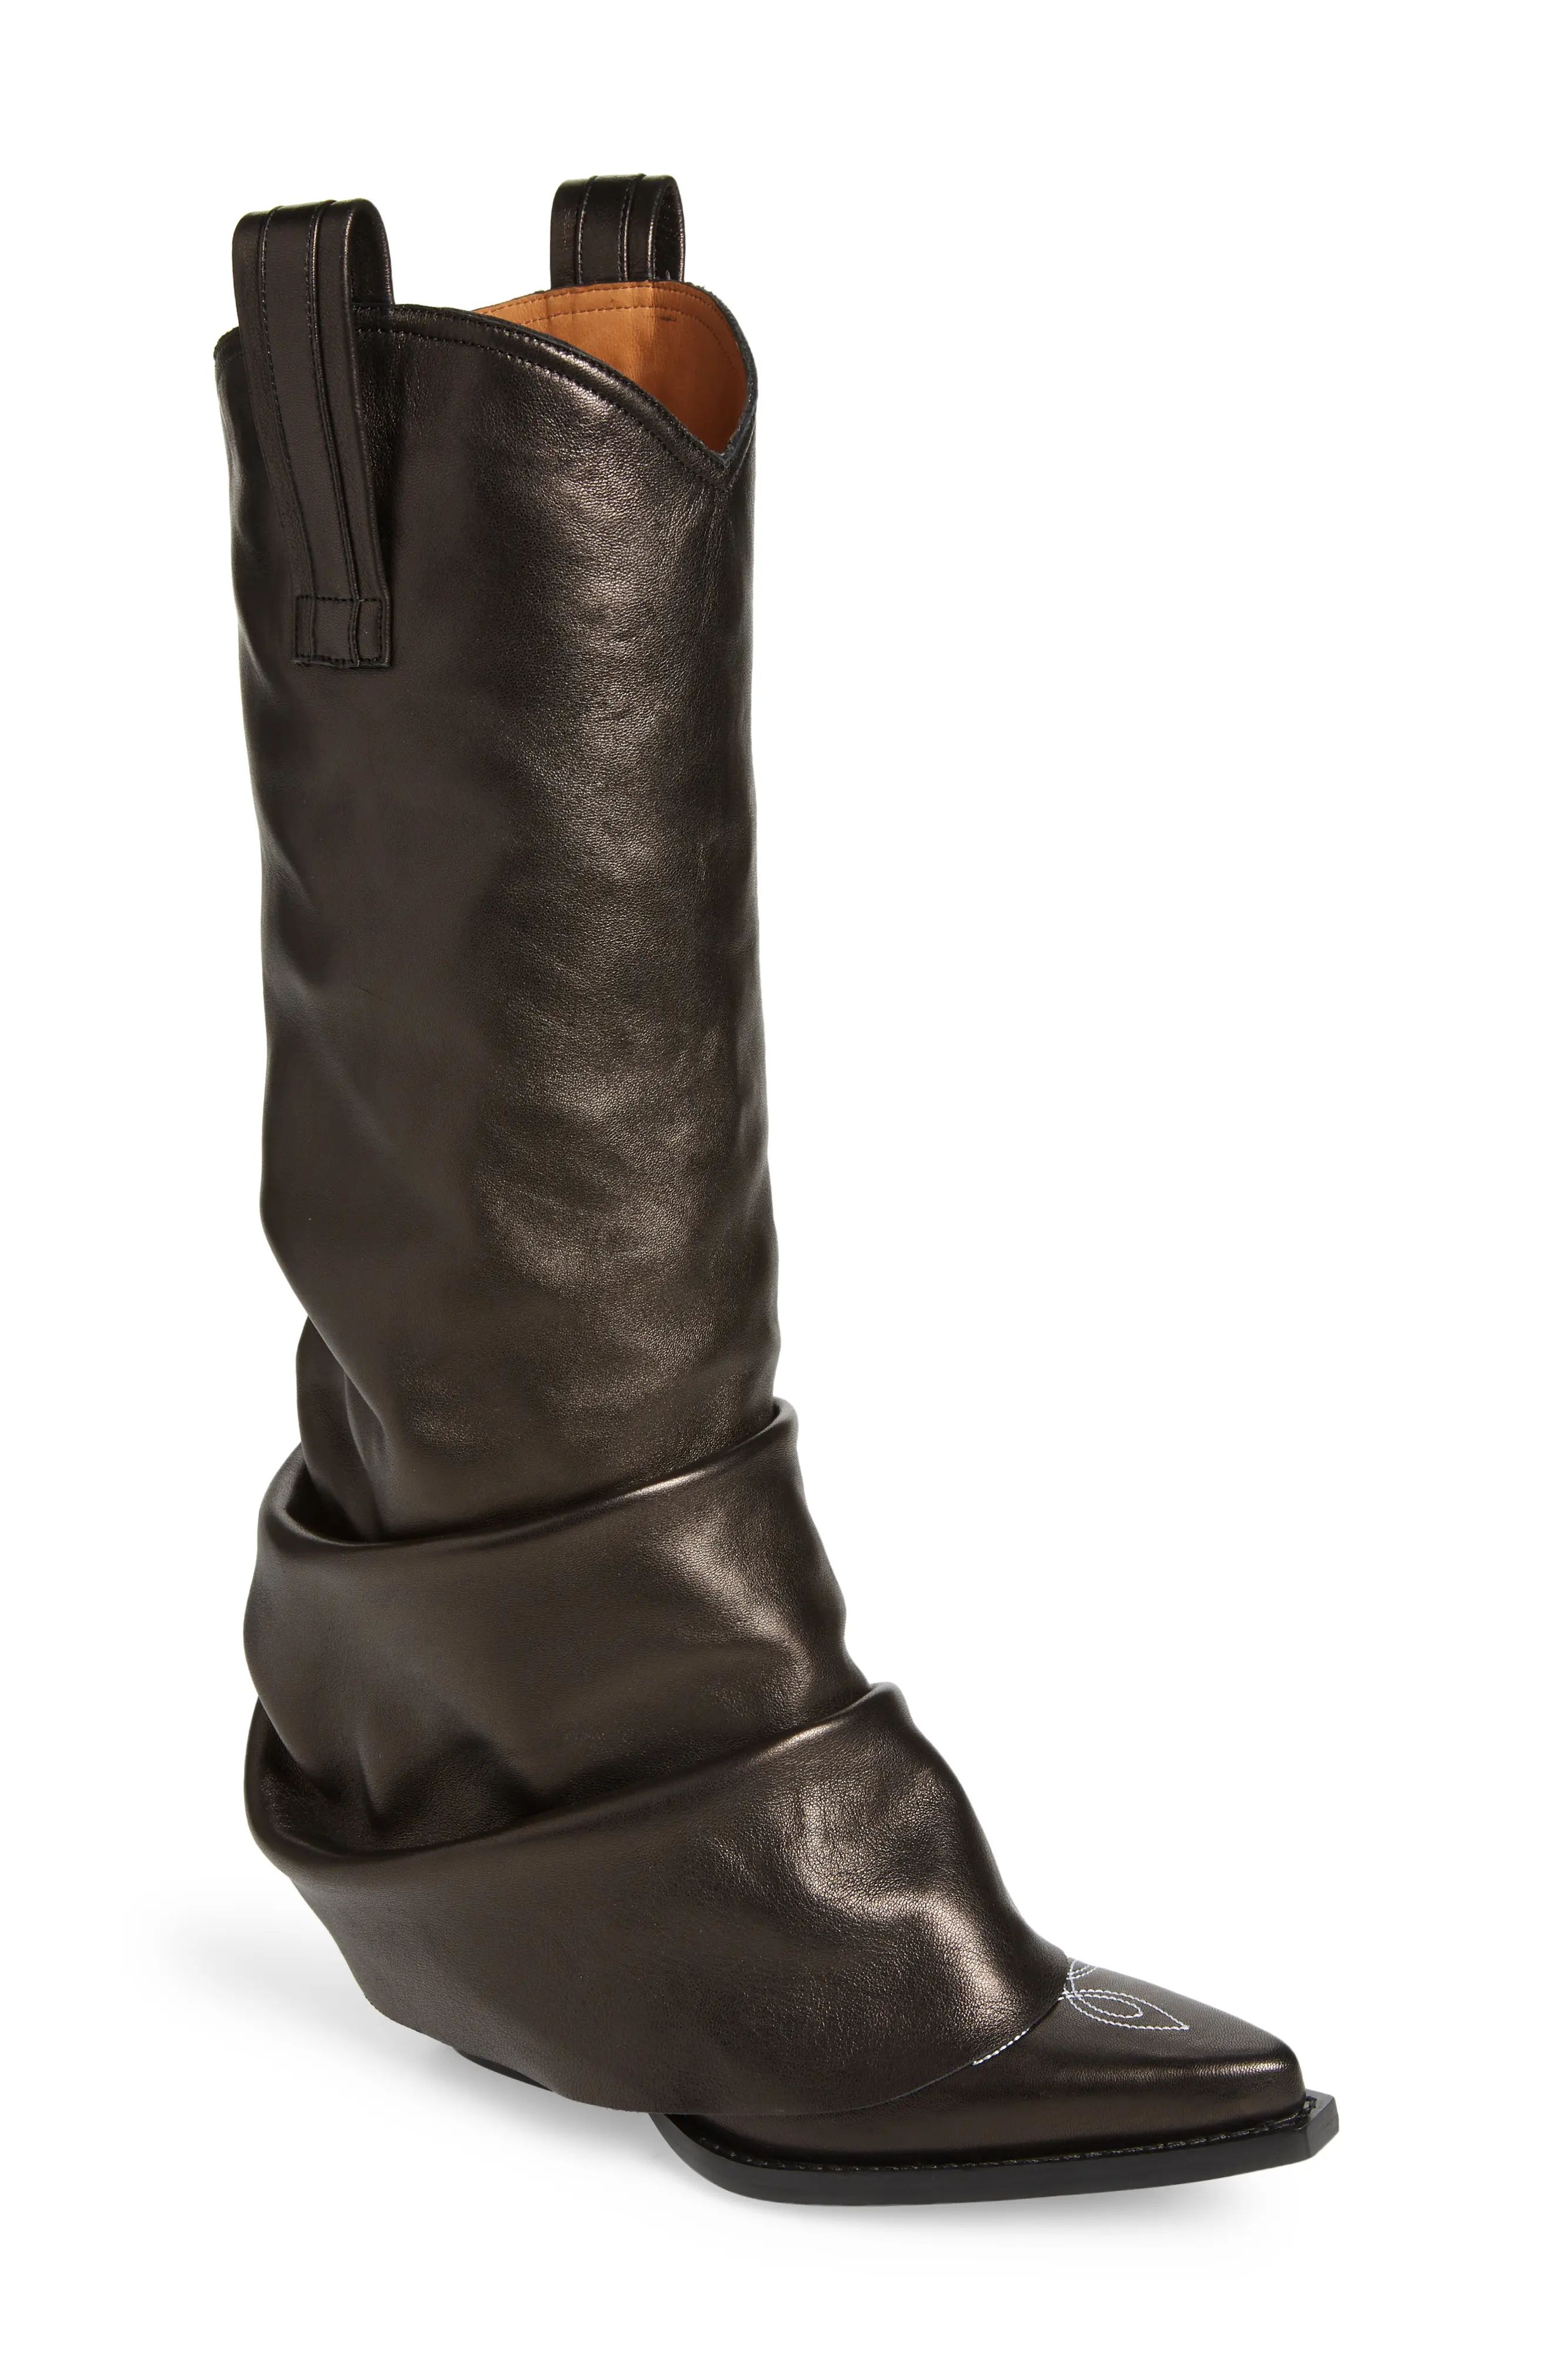 R13 Leather Sleeve Cowboy Boot, Size 7Us in Black Leather at Nordstrom | Nordstrom